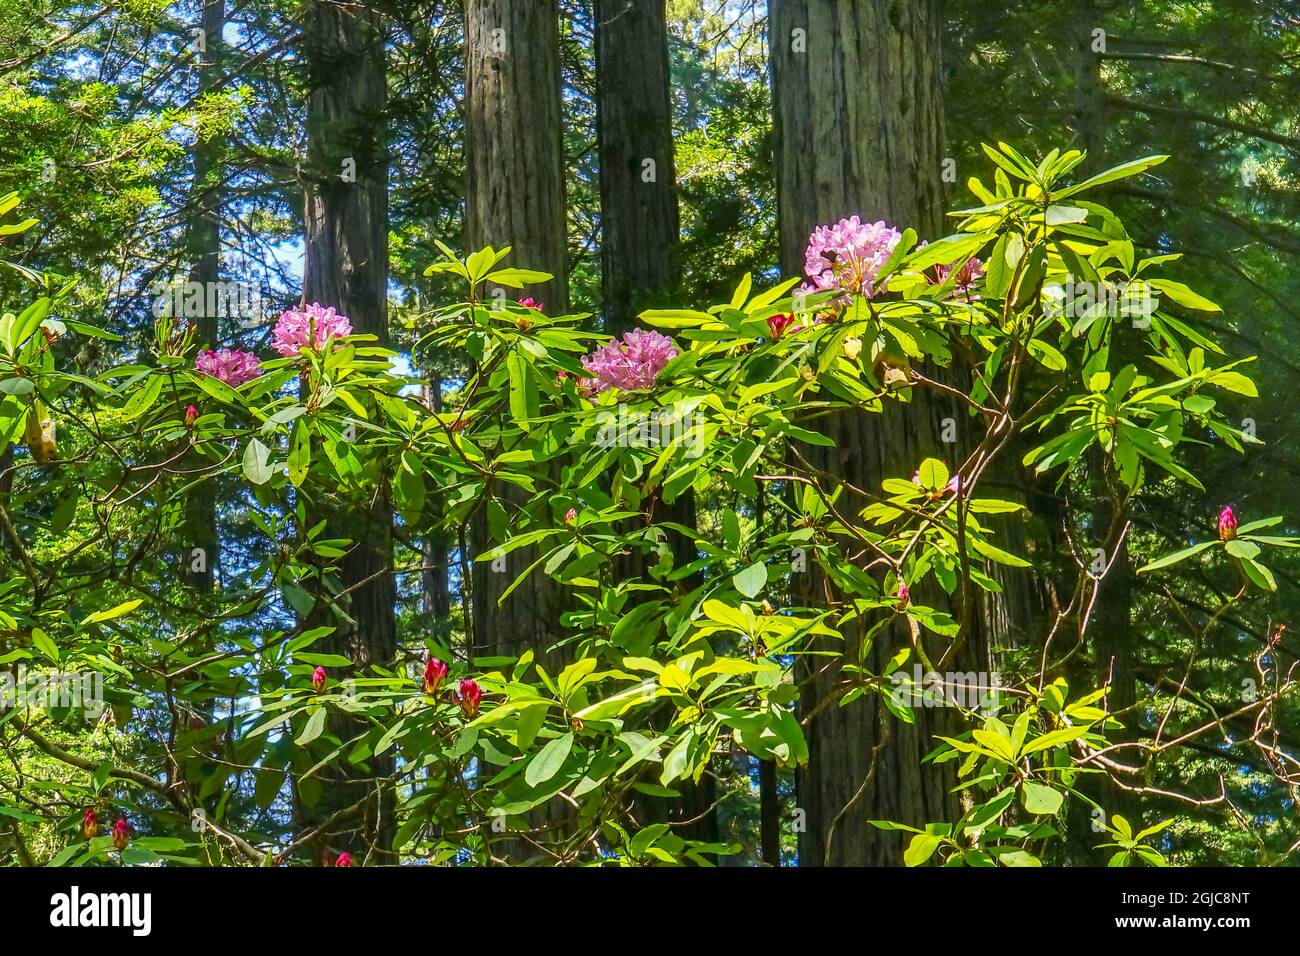 Green trees pink rhododendron, Lady Bird Johnson Grove, Redwoods National Park, California. Tallest trees in the world, thousands of year old. Stock Photo